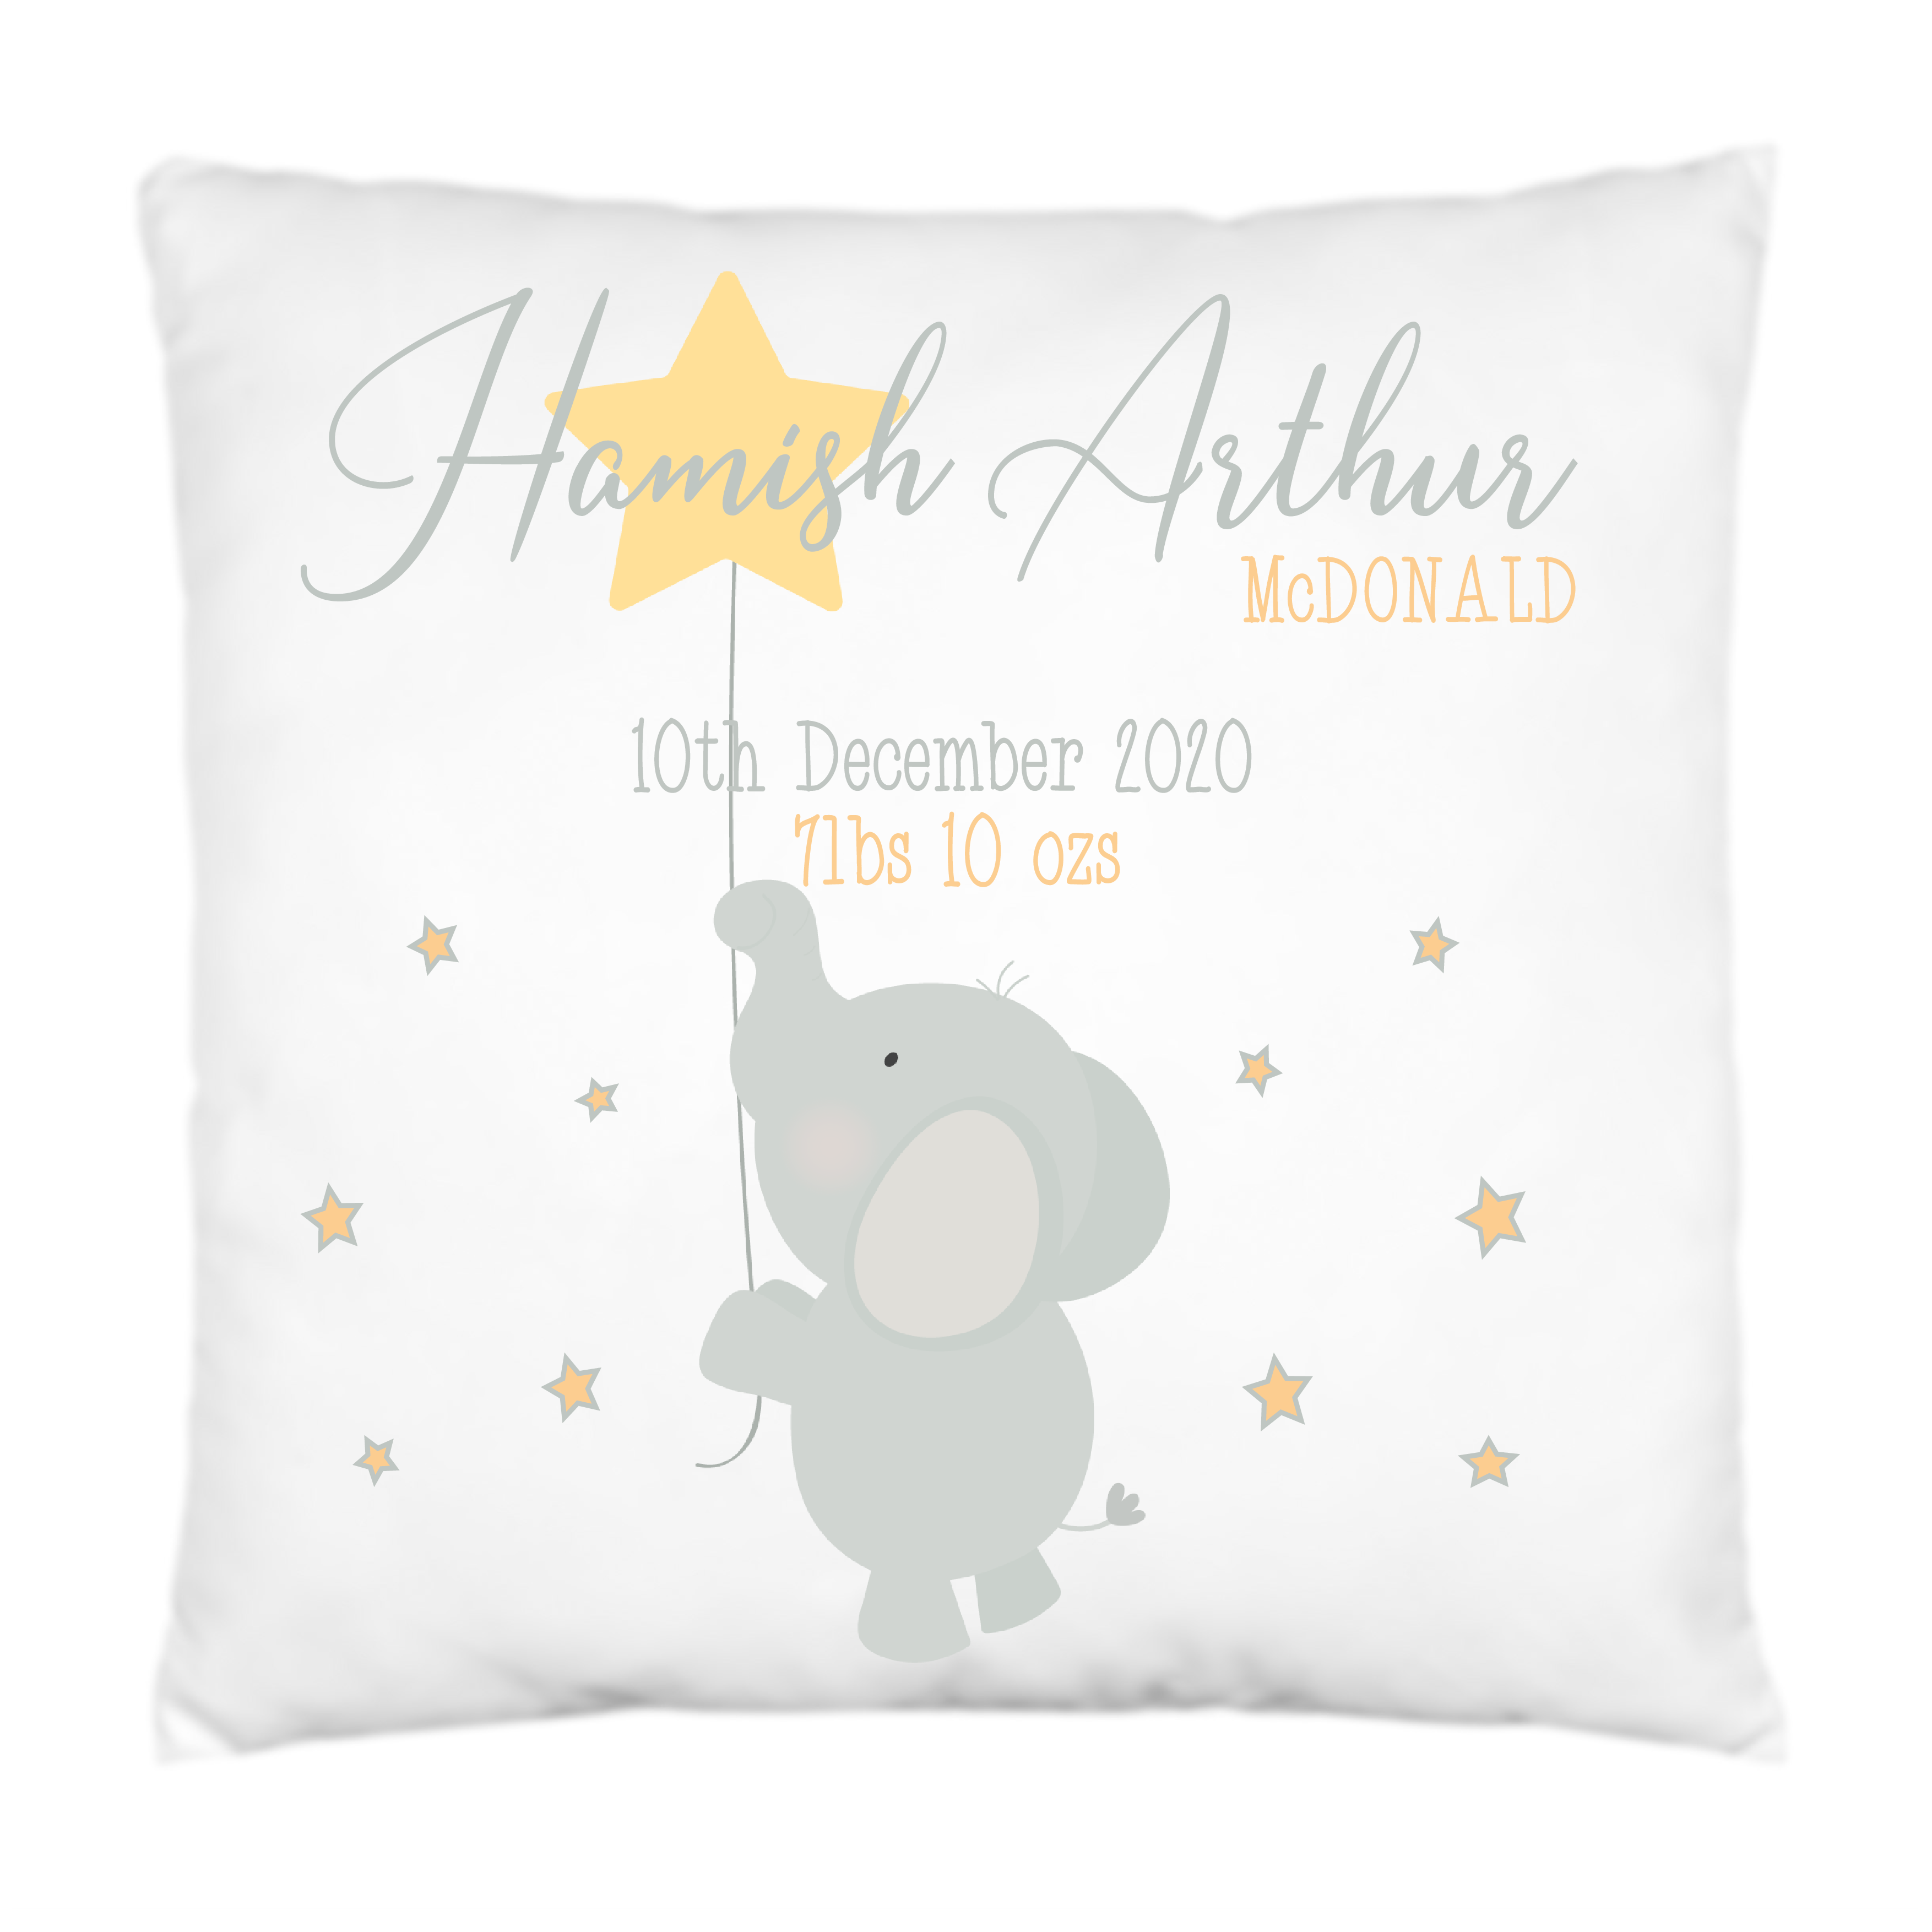 Personalised New Baby Cushion,Pillow,Perfect Gift For New Baby Boy,40 cms square